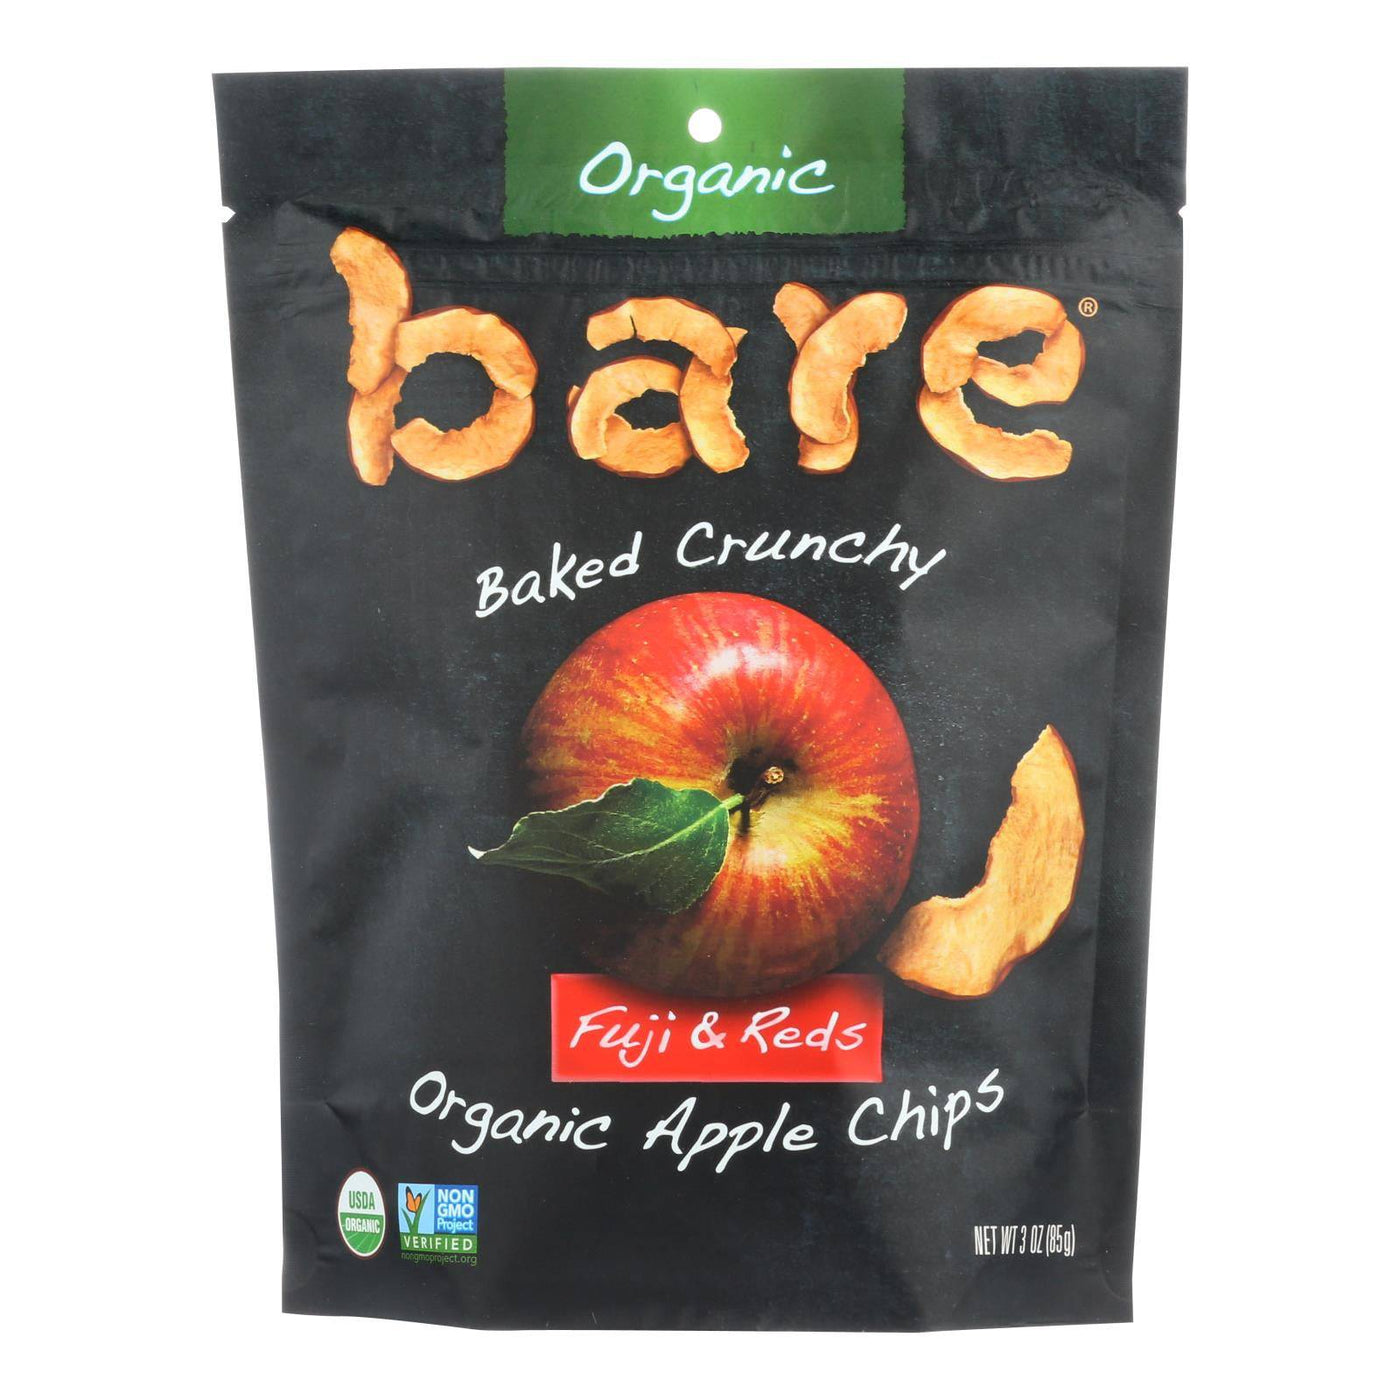 Buy Bare Fruit Apple Chips - Organic - Crunchy - Fuji Red - 3 Oz - Case Of 12  at OnlyNaturals.us